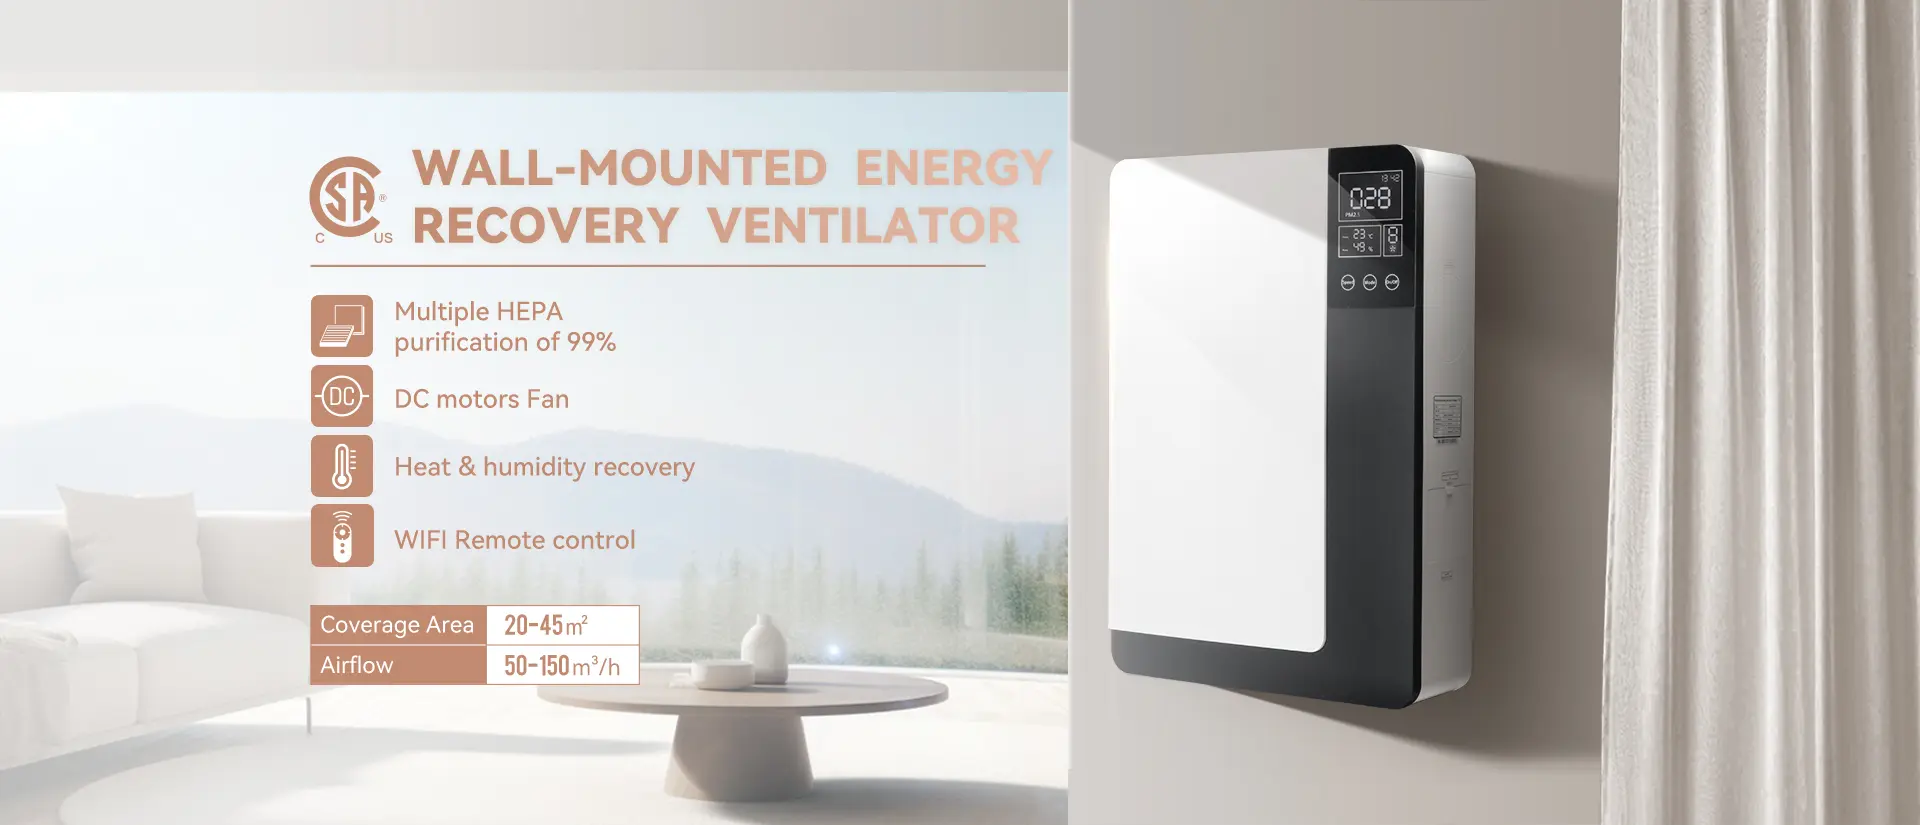 Holtop_wall_mounted_Energy_Recovery_Ventilation